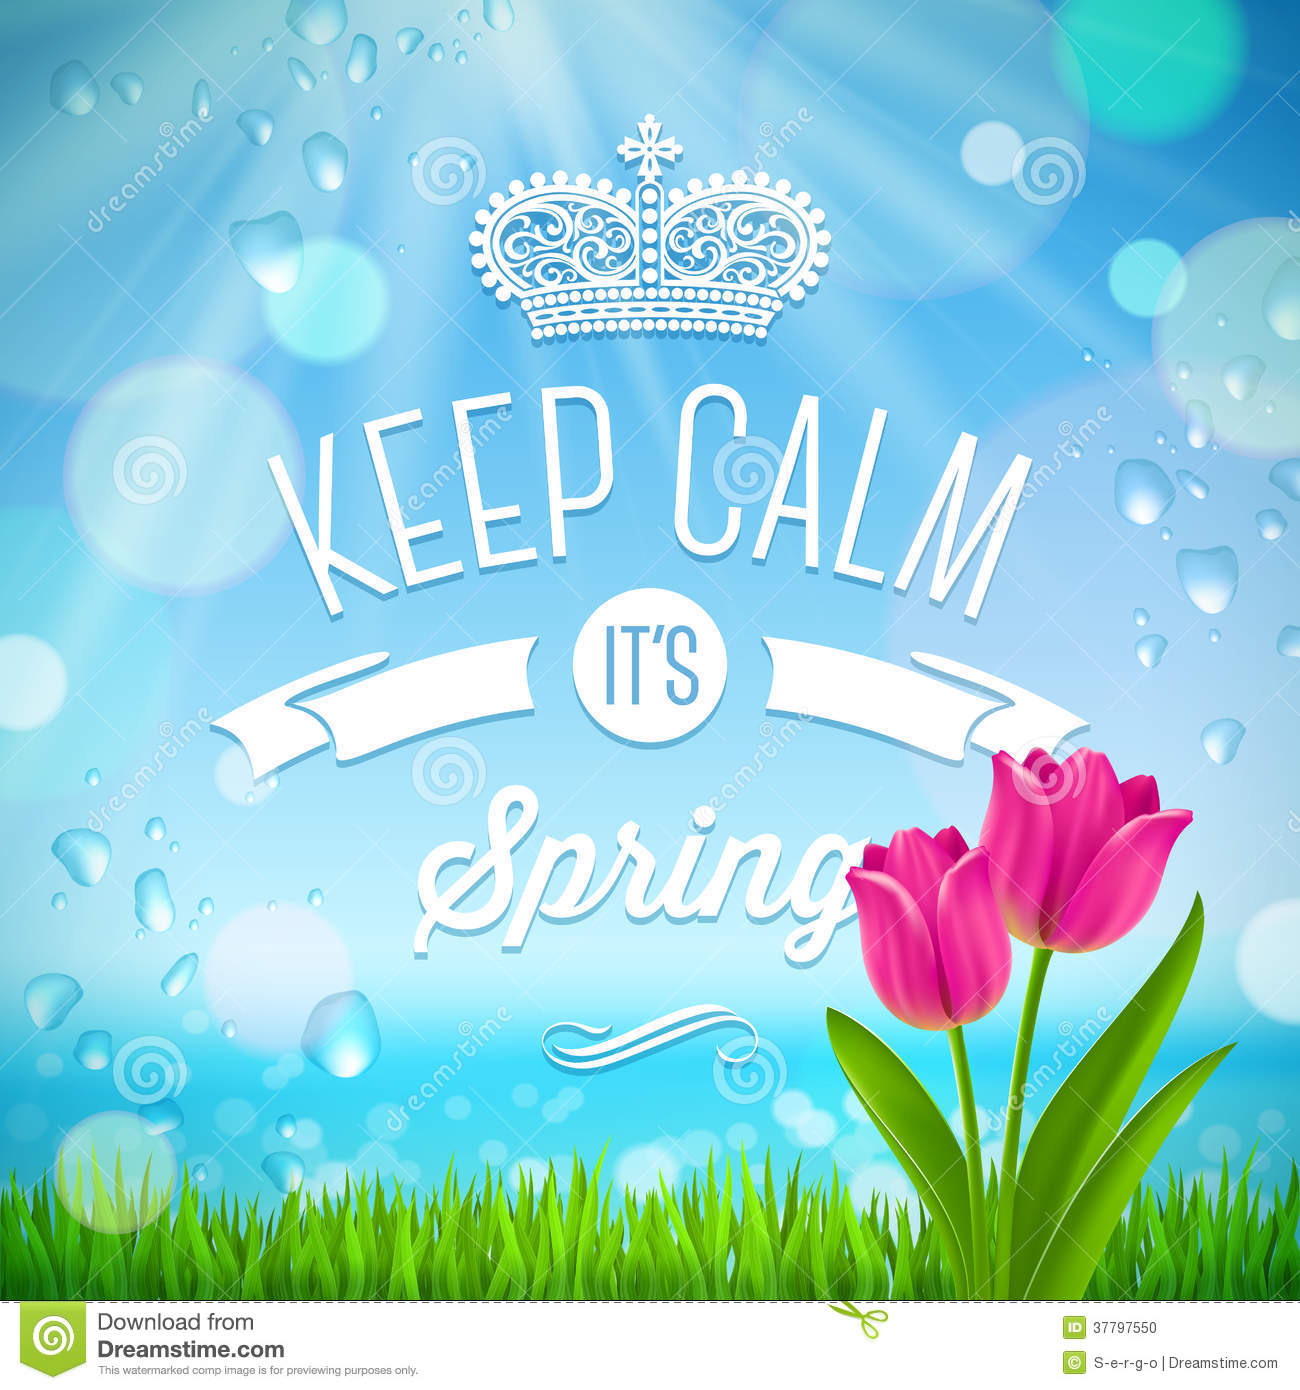 Keep Calm And Think Spring Wallpaper Gallery